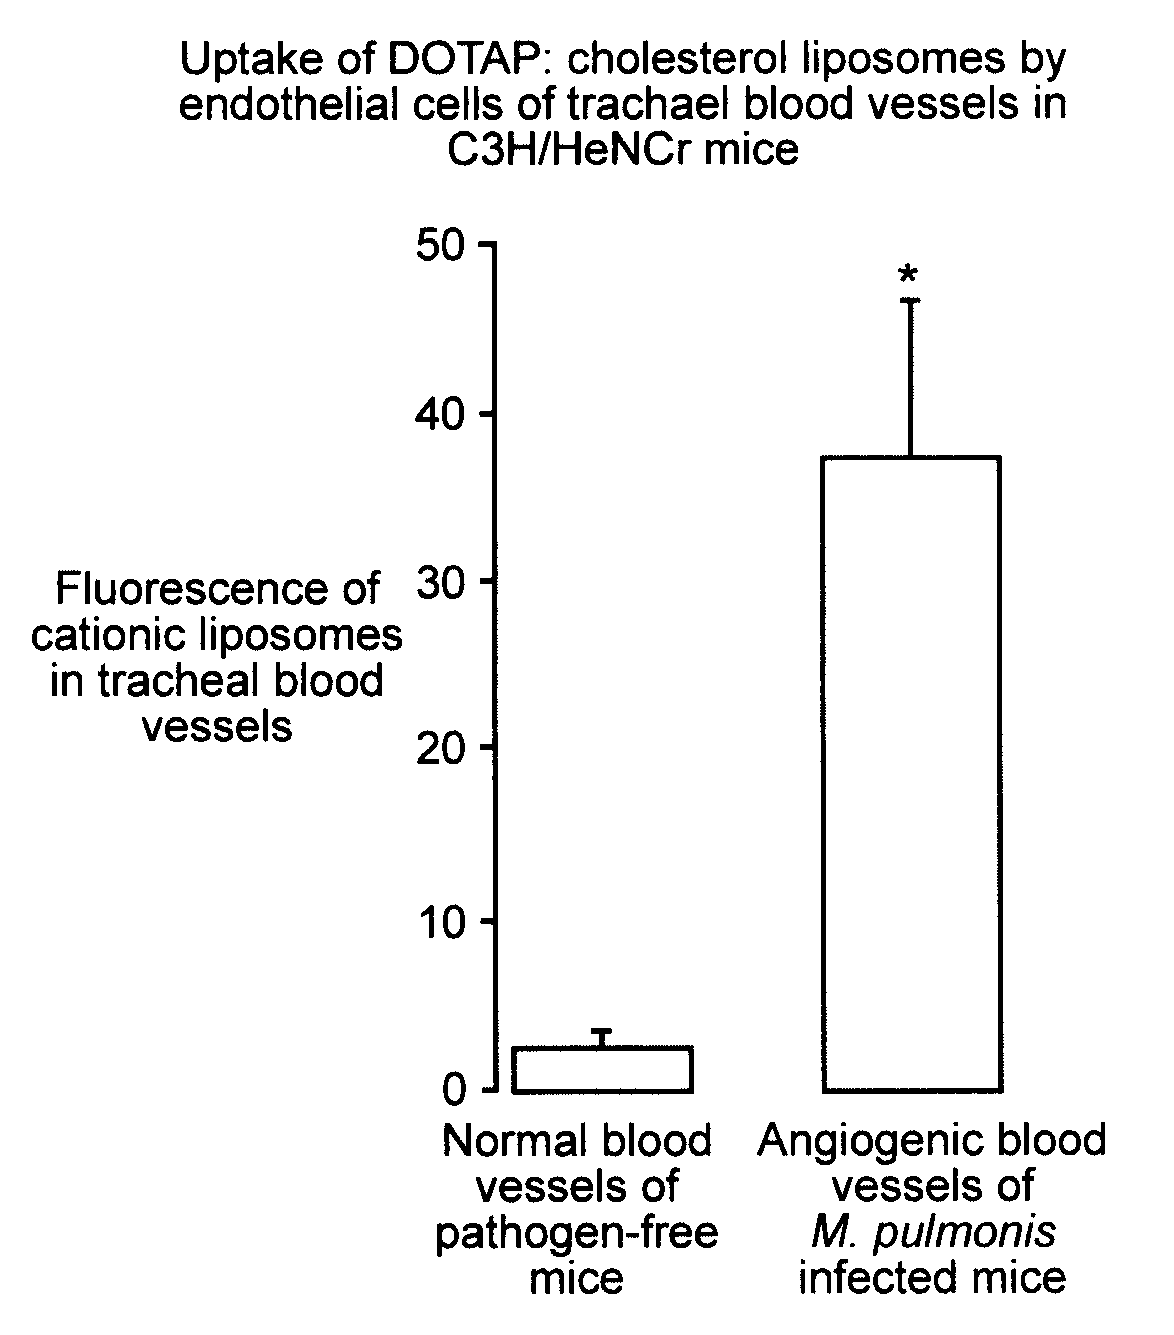 Cationic liposome delivery of taxanes to angiogenic blood vessels